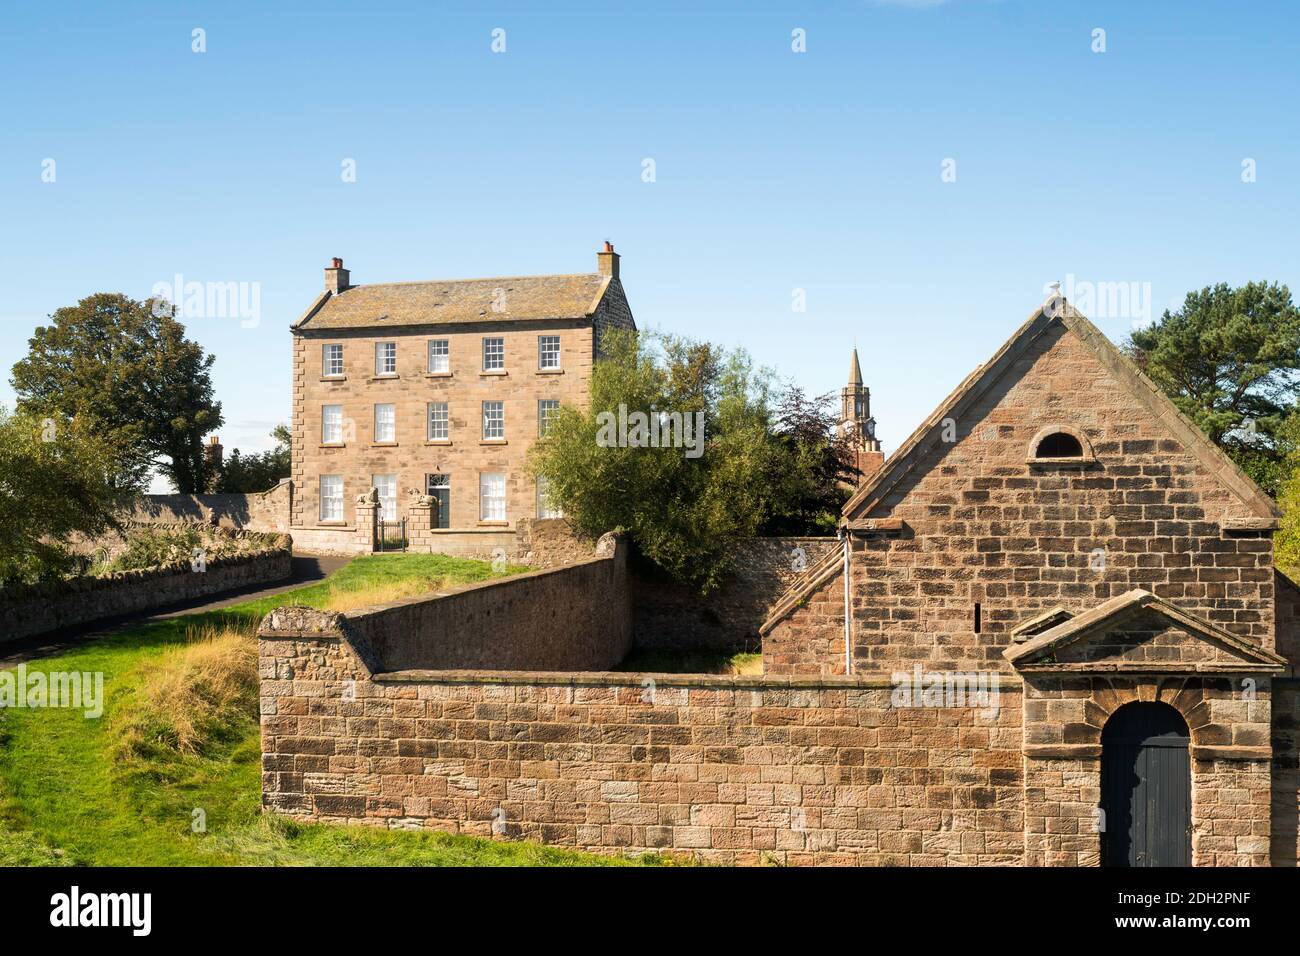 The 18th century Magazine or munitions store and Lions House in Berwick-upon-Tweed, Northumberland, England, UK Stock Photo